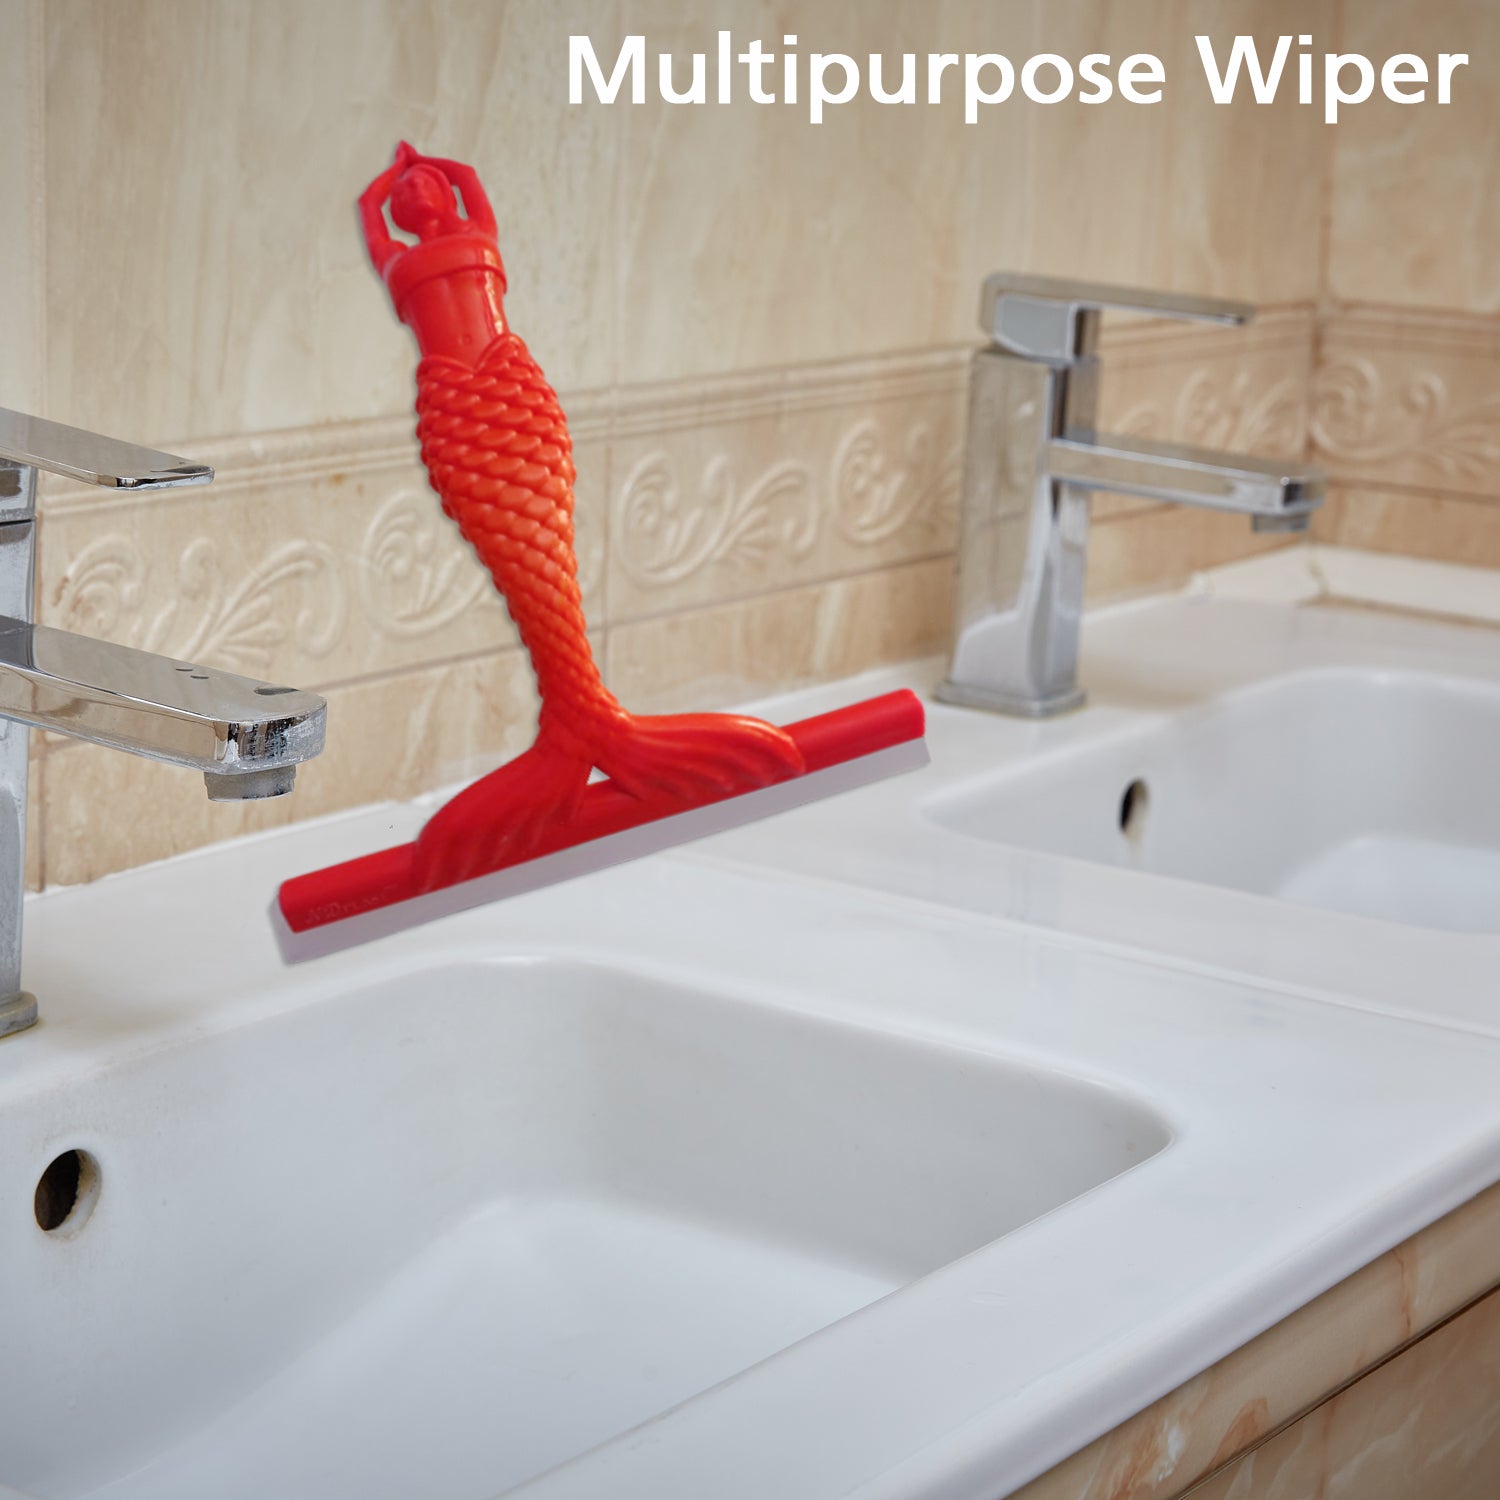 6160 Multipurpose Wiper Widely Used In Bathrooms And Kitchens To Clean Wet And Dirty Surfaces And The Floor Looks Clean. DeoDap